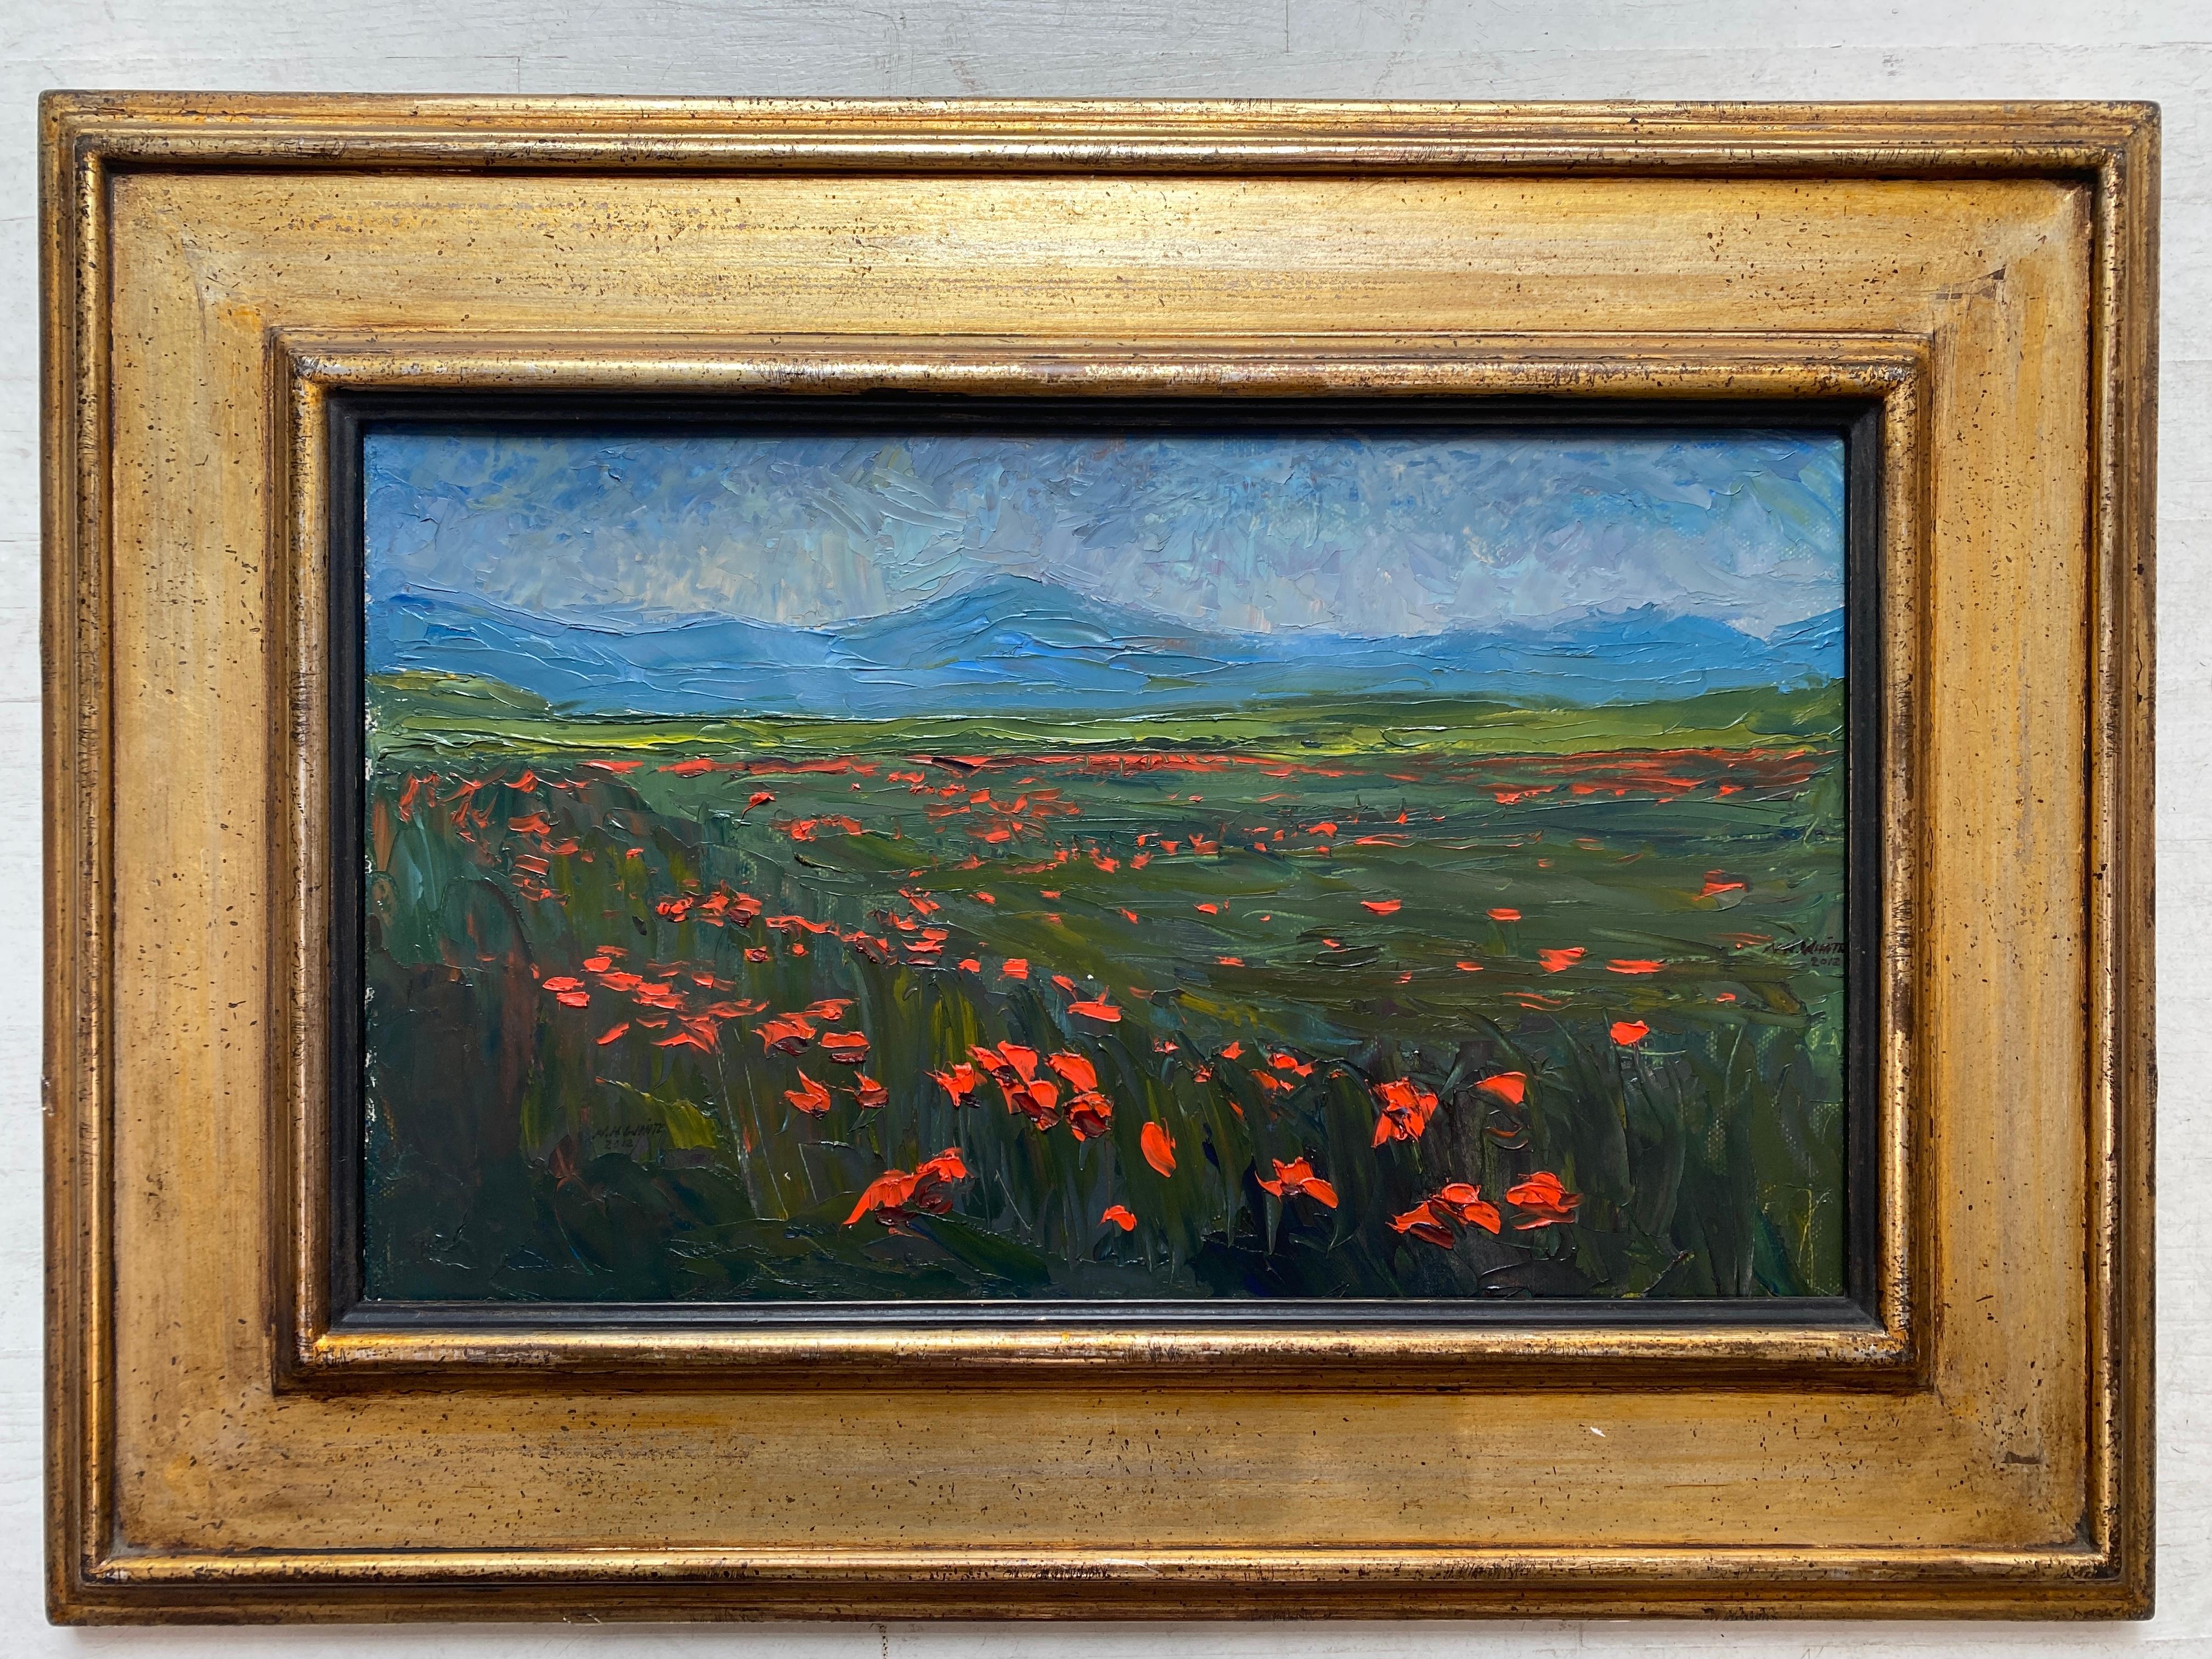 The Poppy Field 05.19.2012 - Painting by Nelson White